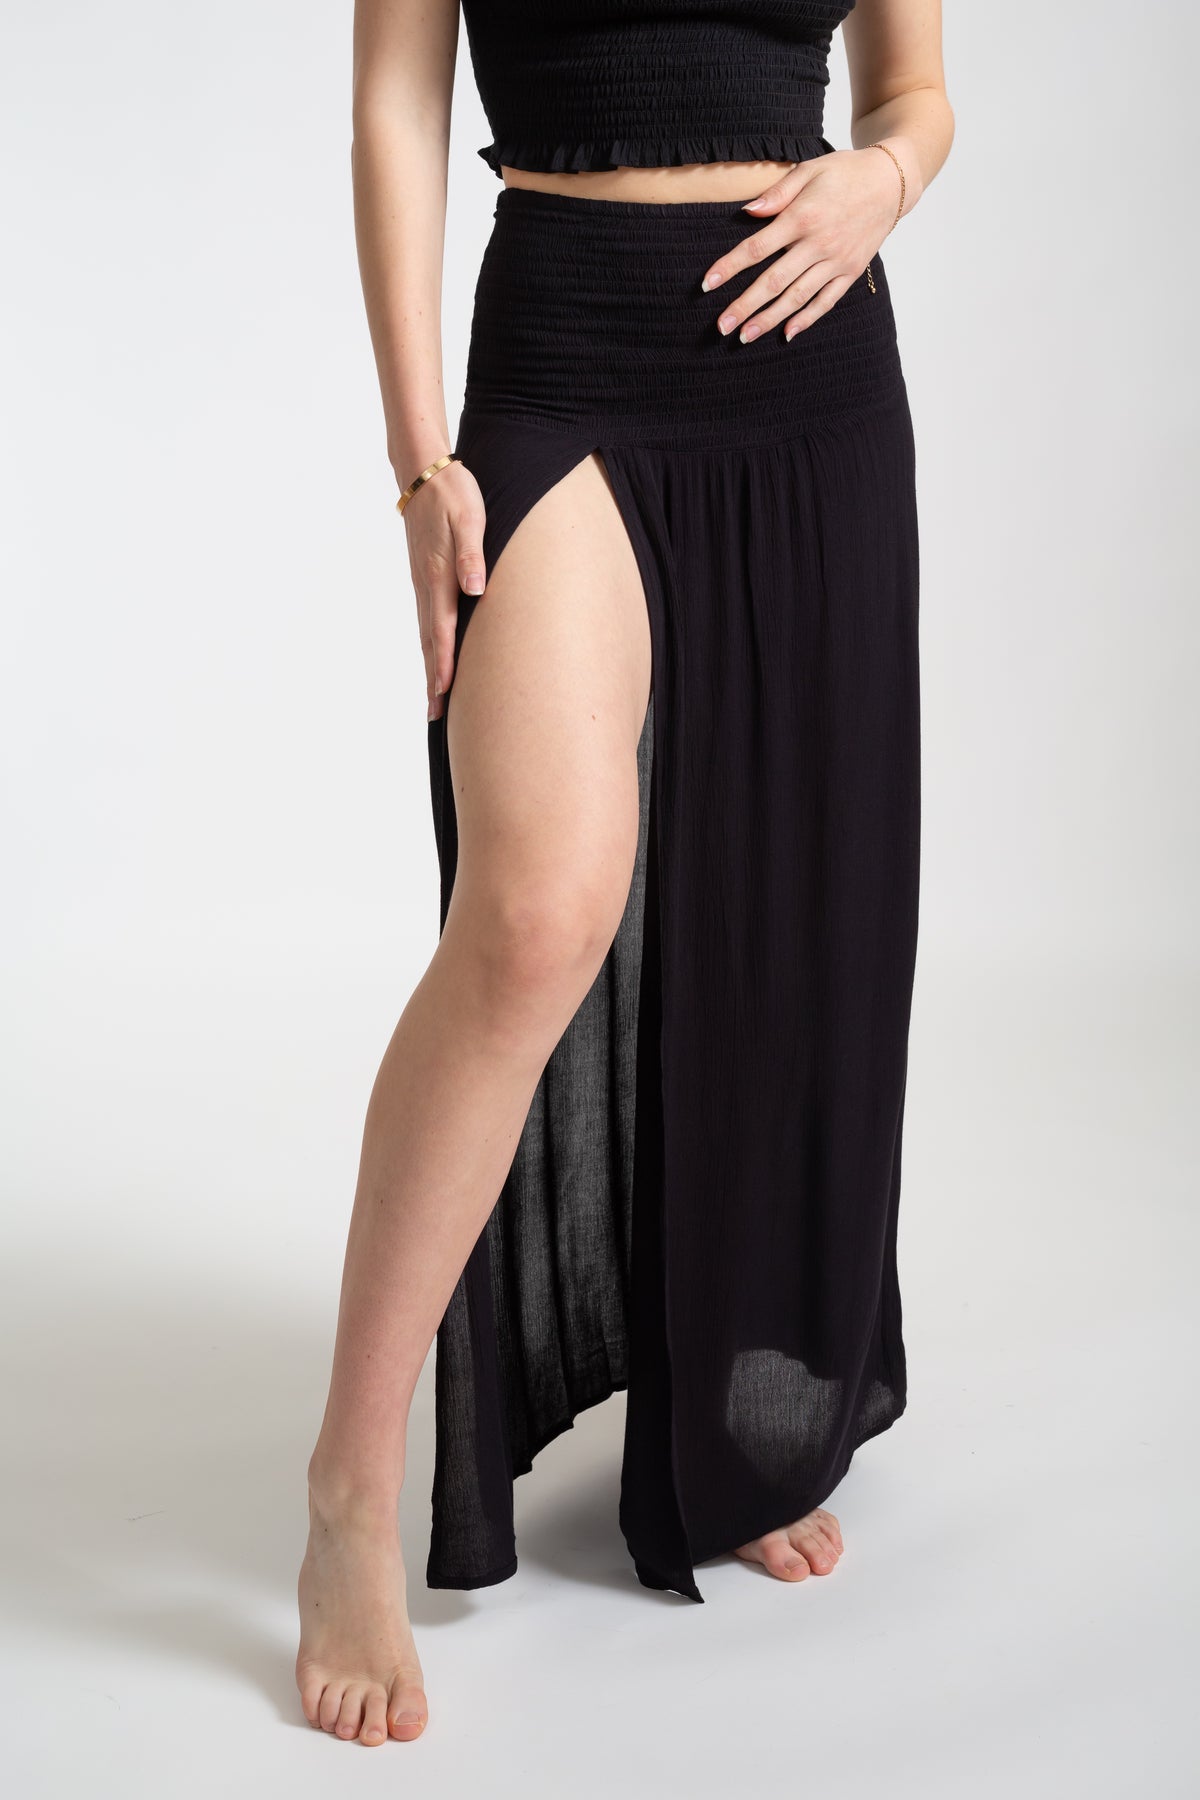 Blonde model wearing the black Miami convertible skirt with deep slit facing front close up. Featuring smocked detailing, fabric is hundred percent crinkle rayon by Koy Resort cover-up summer collection.